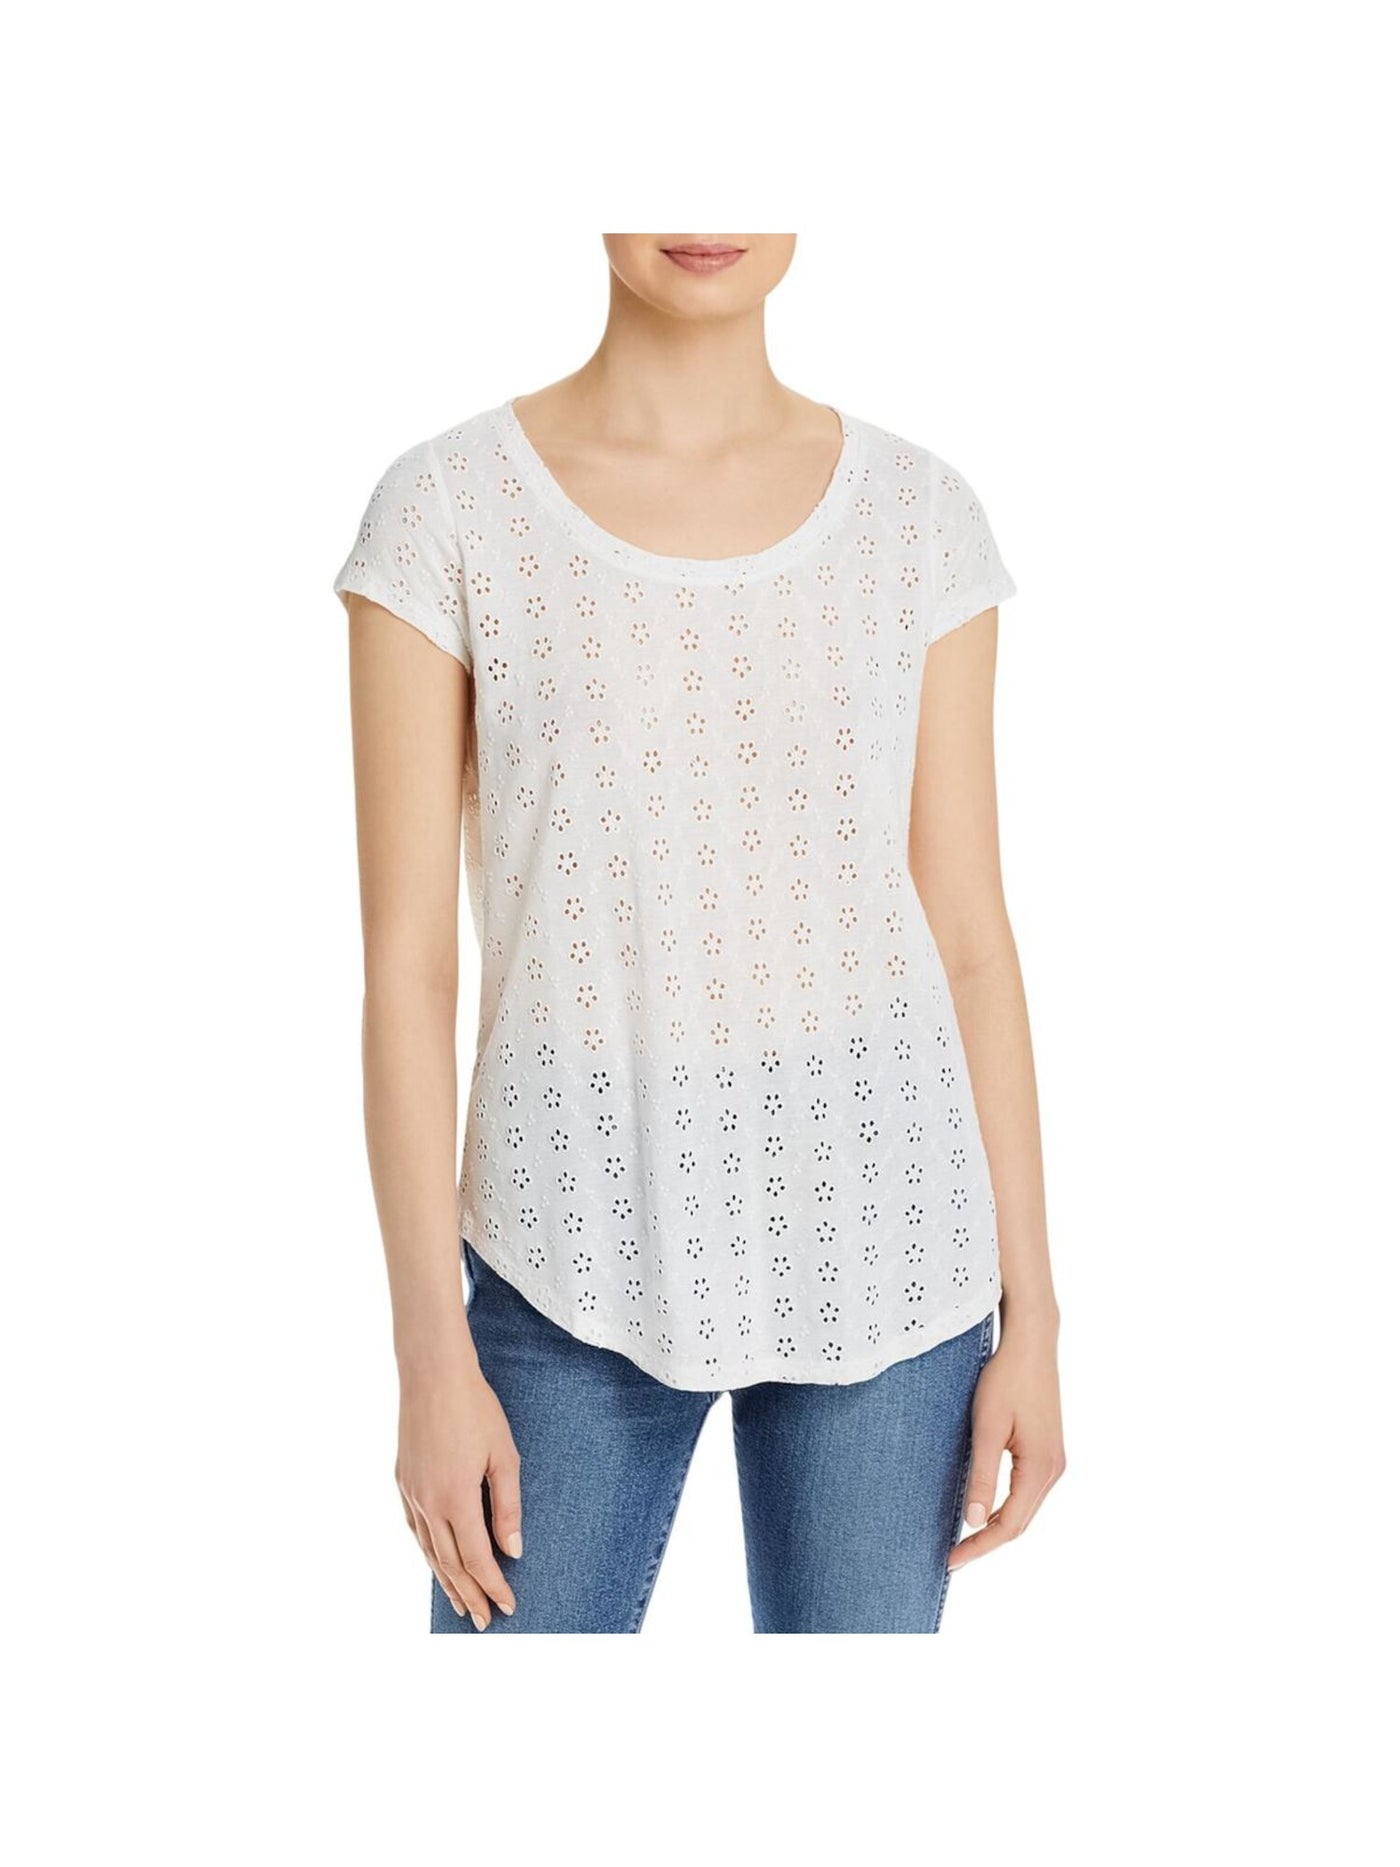 SINGLE THREAD Womens White Eyelet Pullover Style Short Sleeve Scoop Neck Wear To Work Top XS